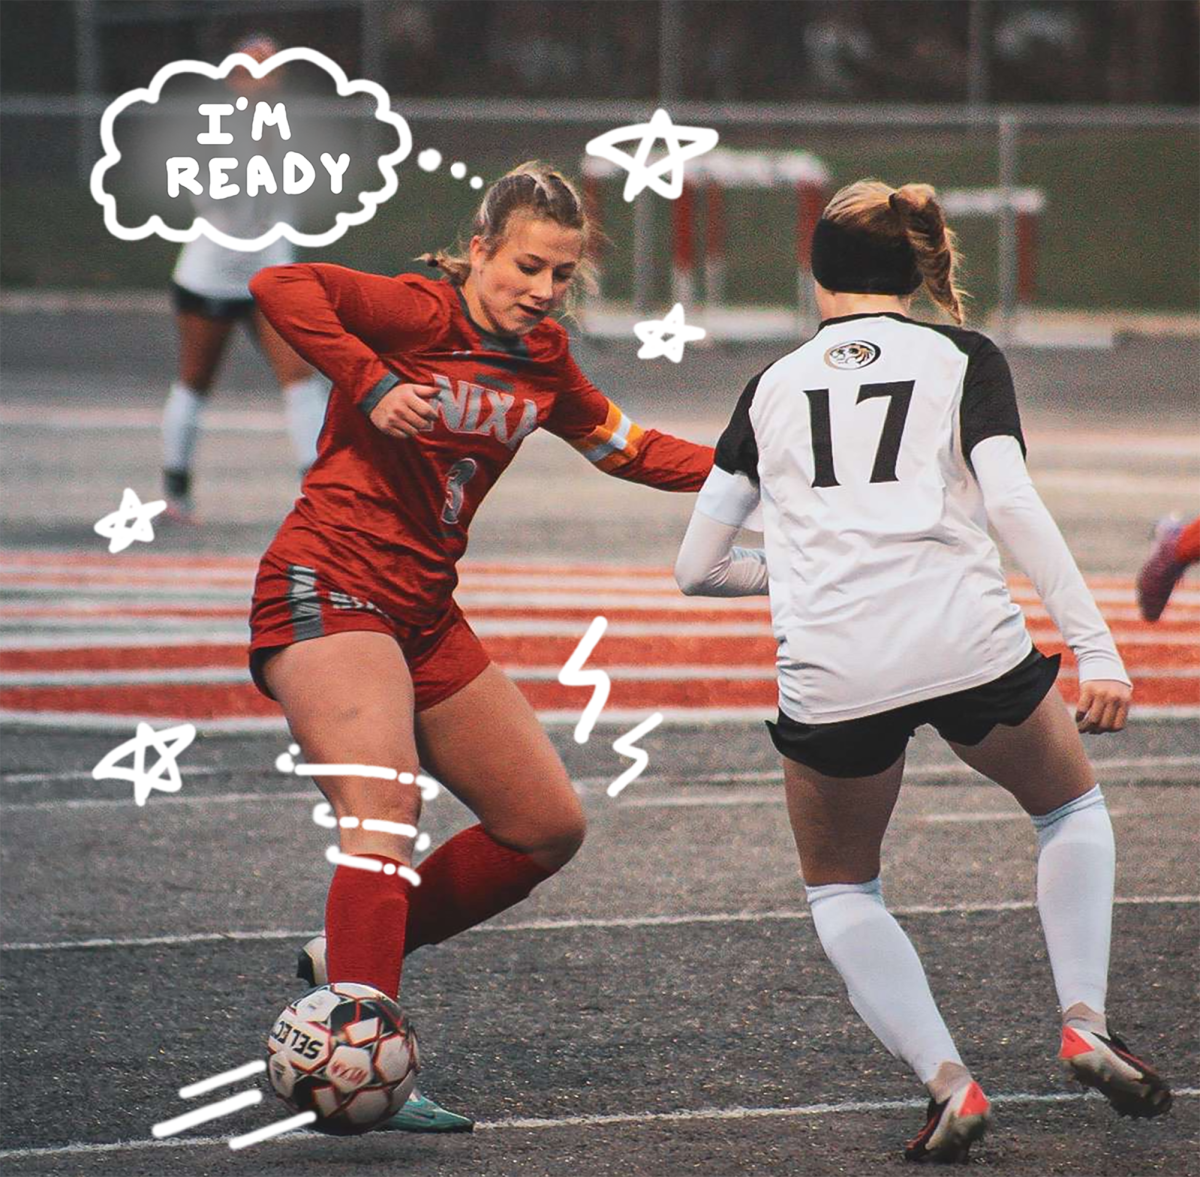 As+senior+Isabella+Johnson+steps+back+onto+the+field+for+the+first+game+of+her+senior+year%2C+she+has+a+lot+on+her+mind.+%E2%80%9CI+have+played+soccer+for+so+long+that+it%E2%80%99s+kind+of+my+identity+in+a+lot+of+ways%2C%E2%80%9D+Johnson+said.